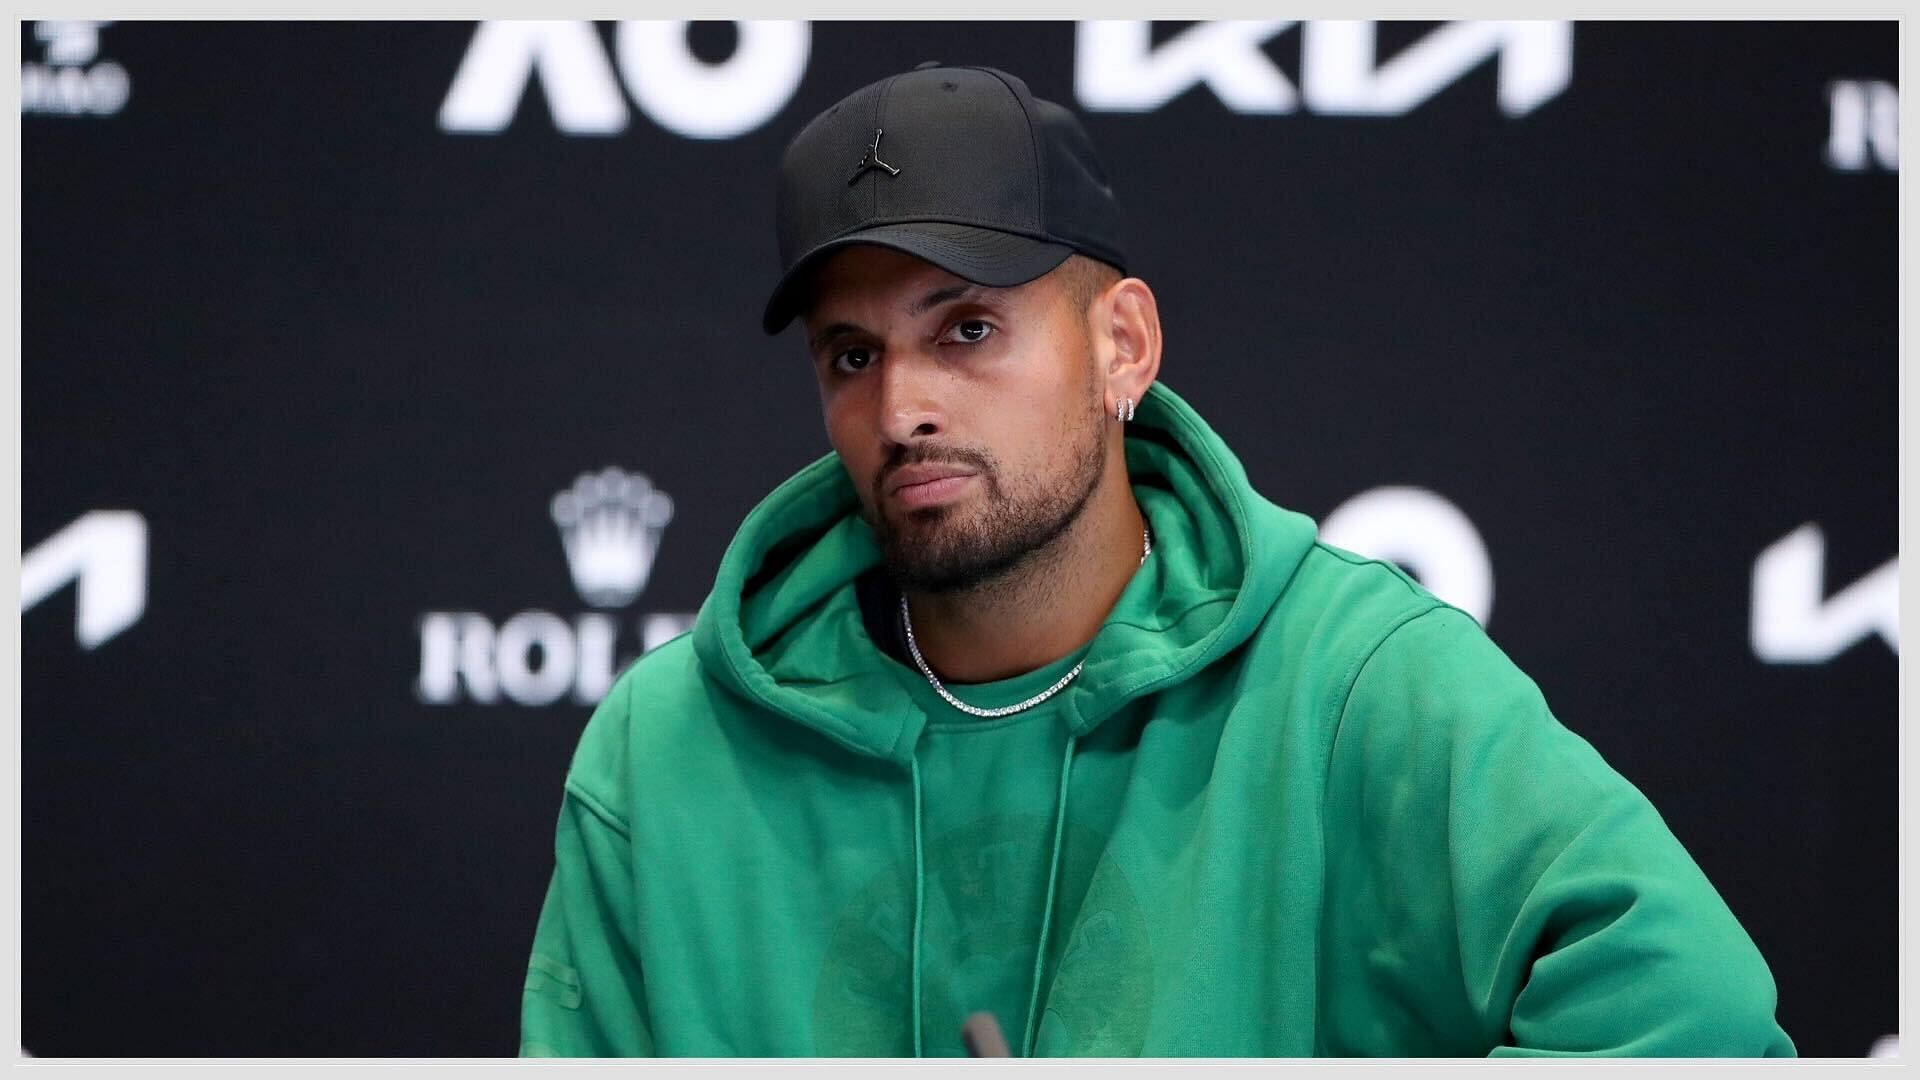 Nick Kyrgios reveals why he is called 